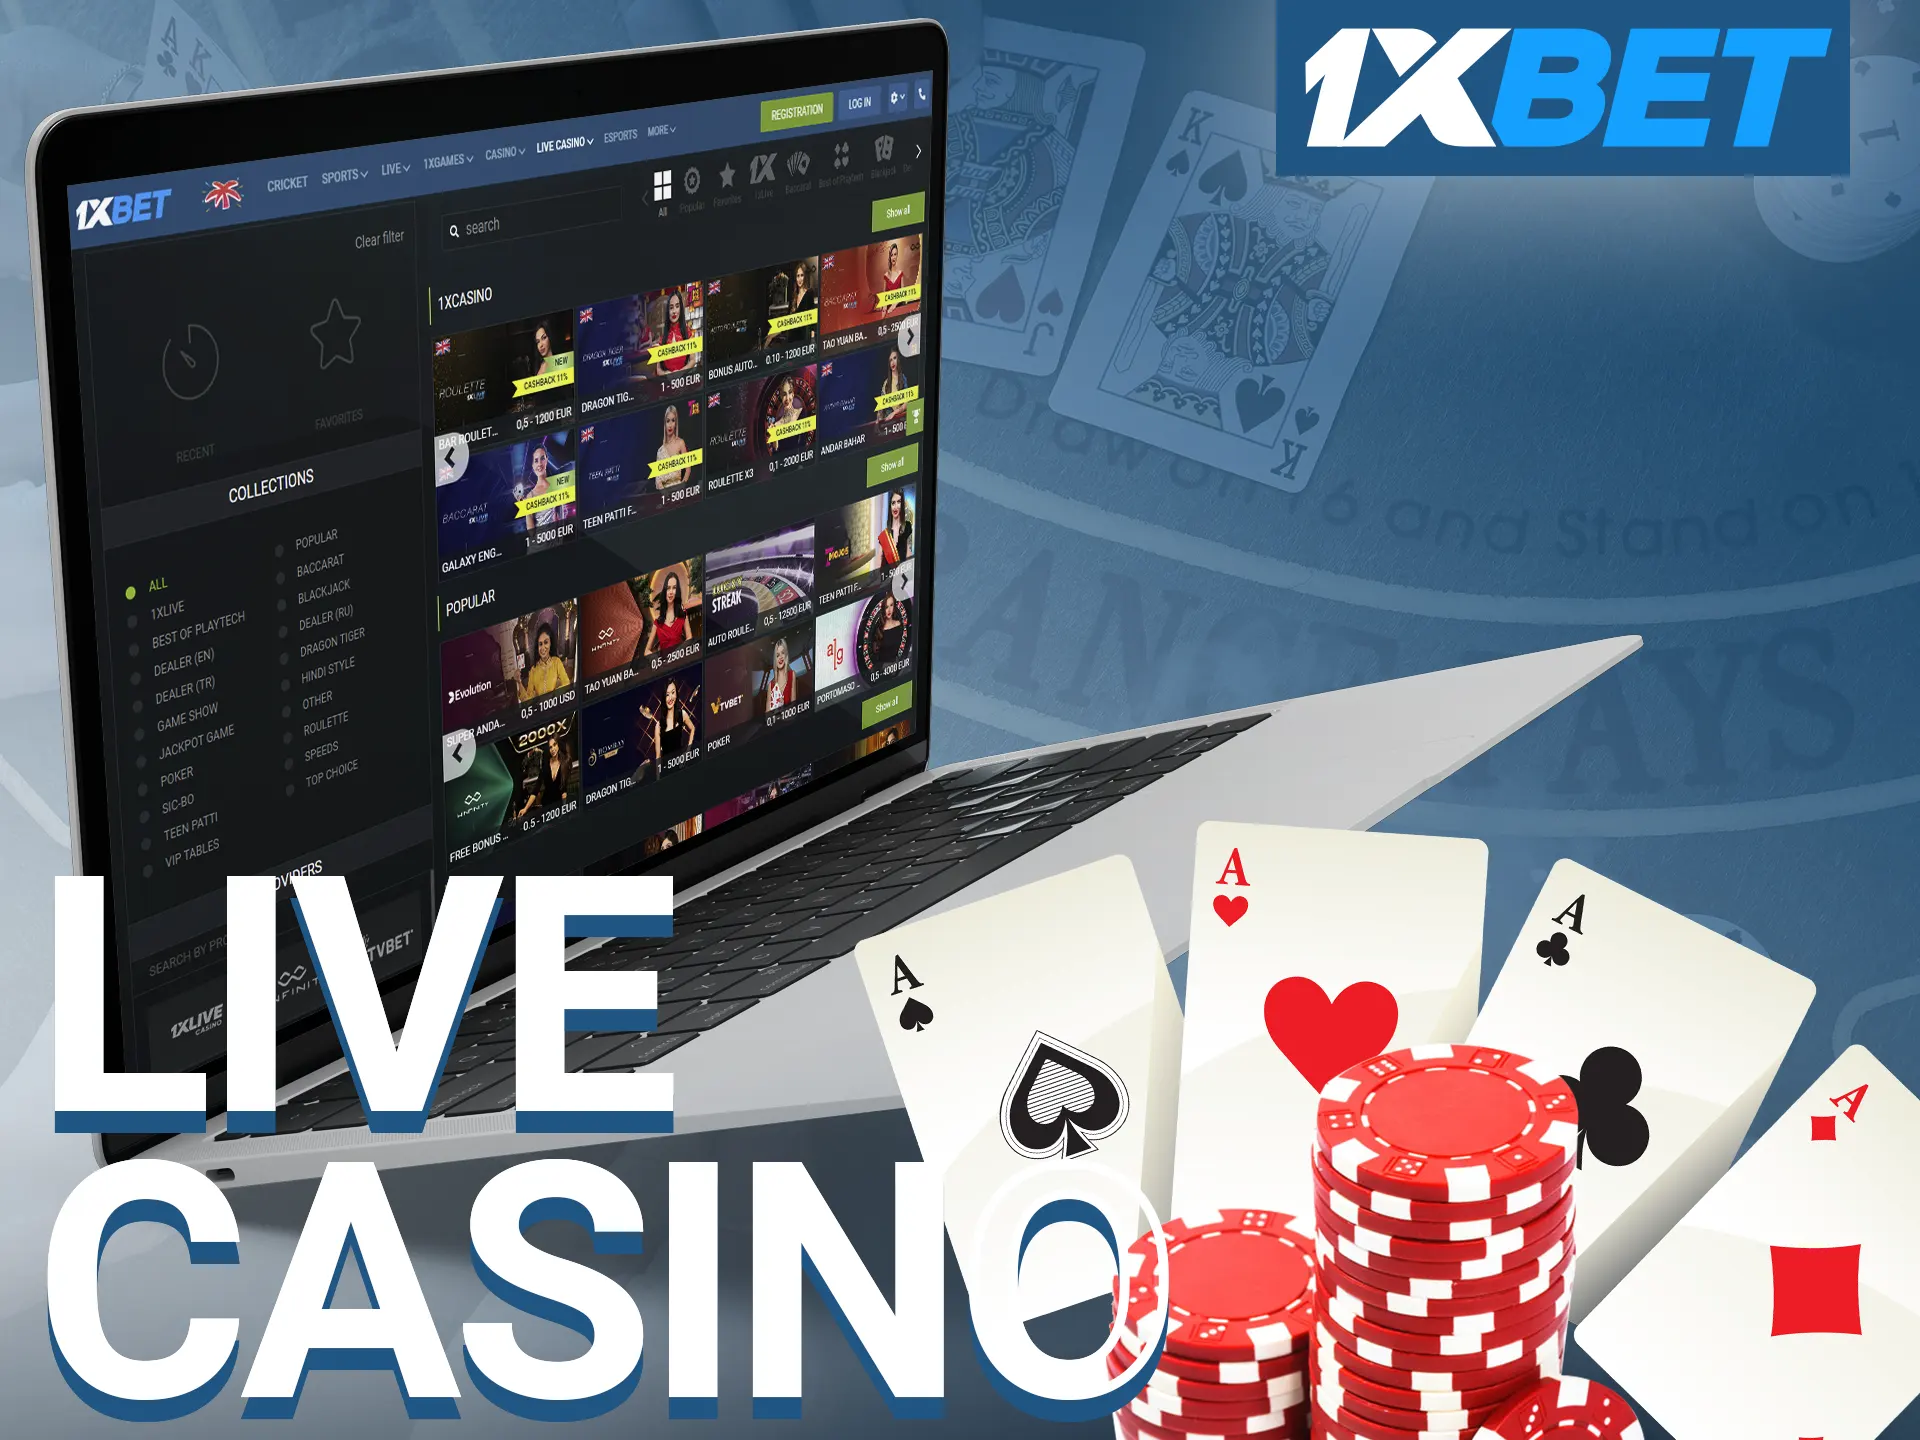 At 1xbet live casino, players can interact with live dealers in real-time.